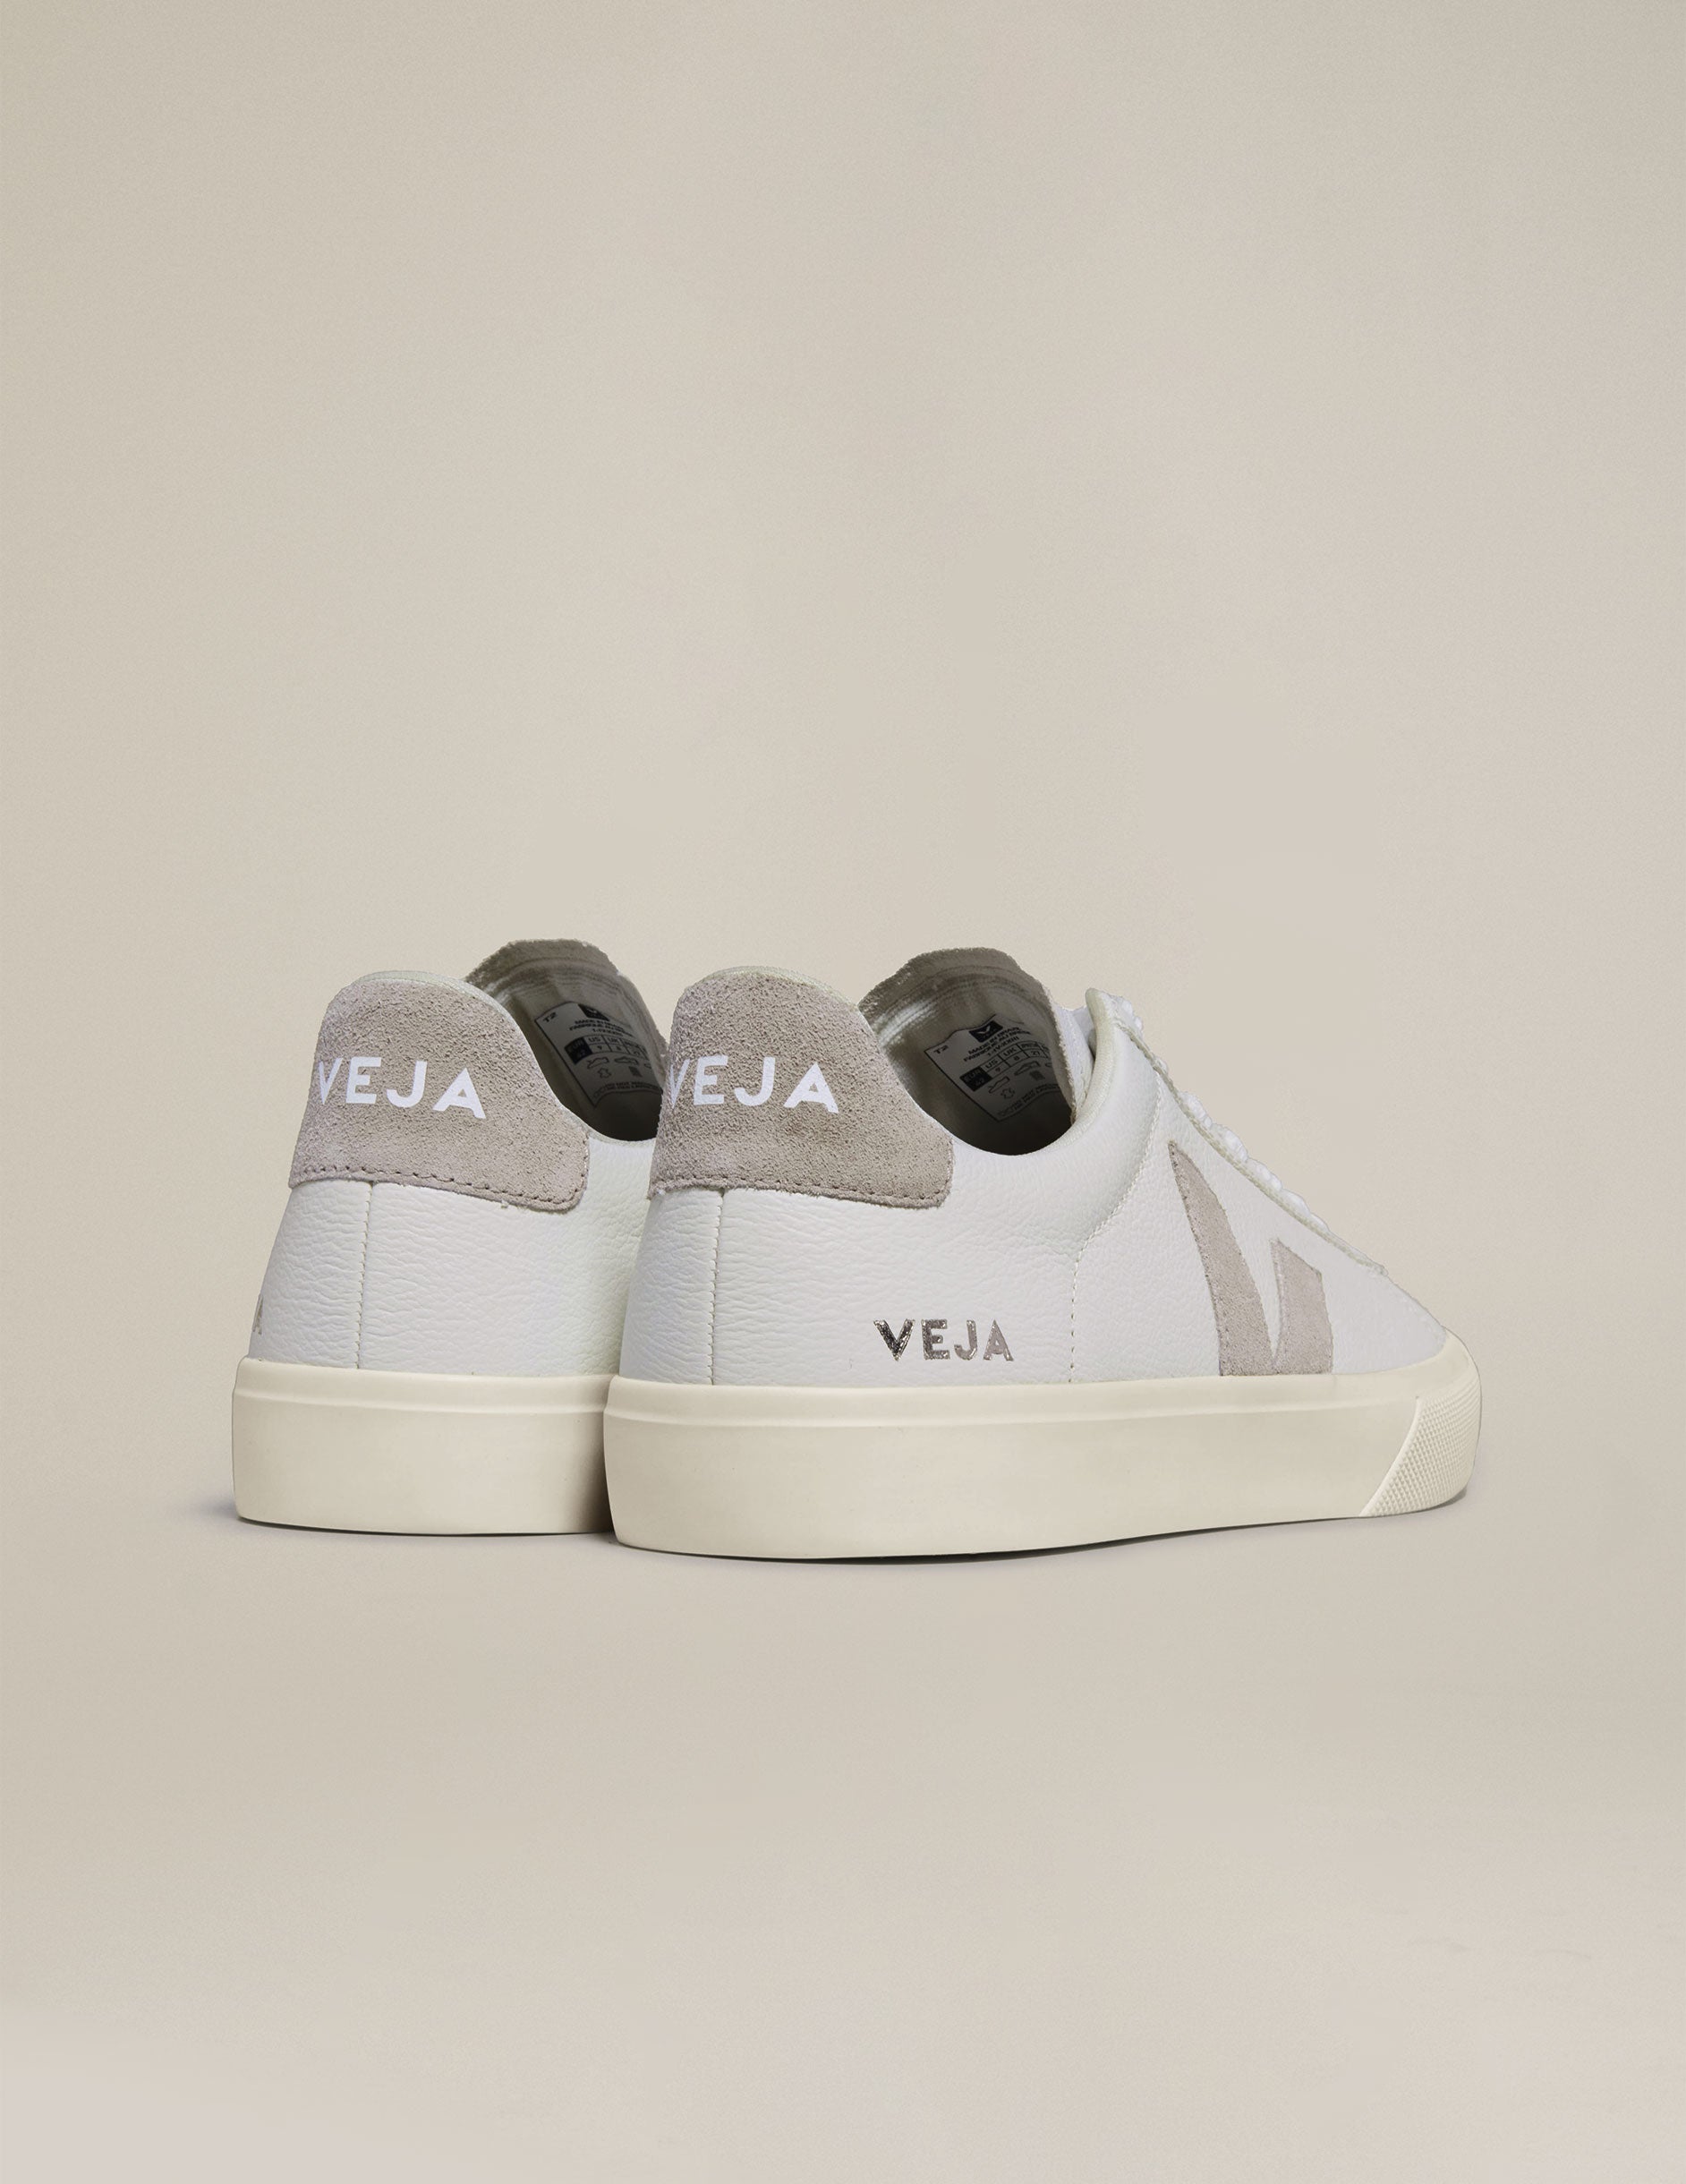 white and tan Veja sneakers.